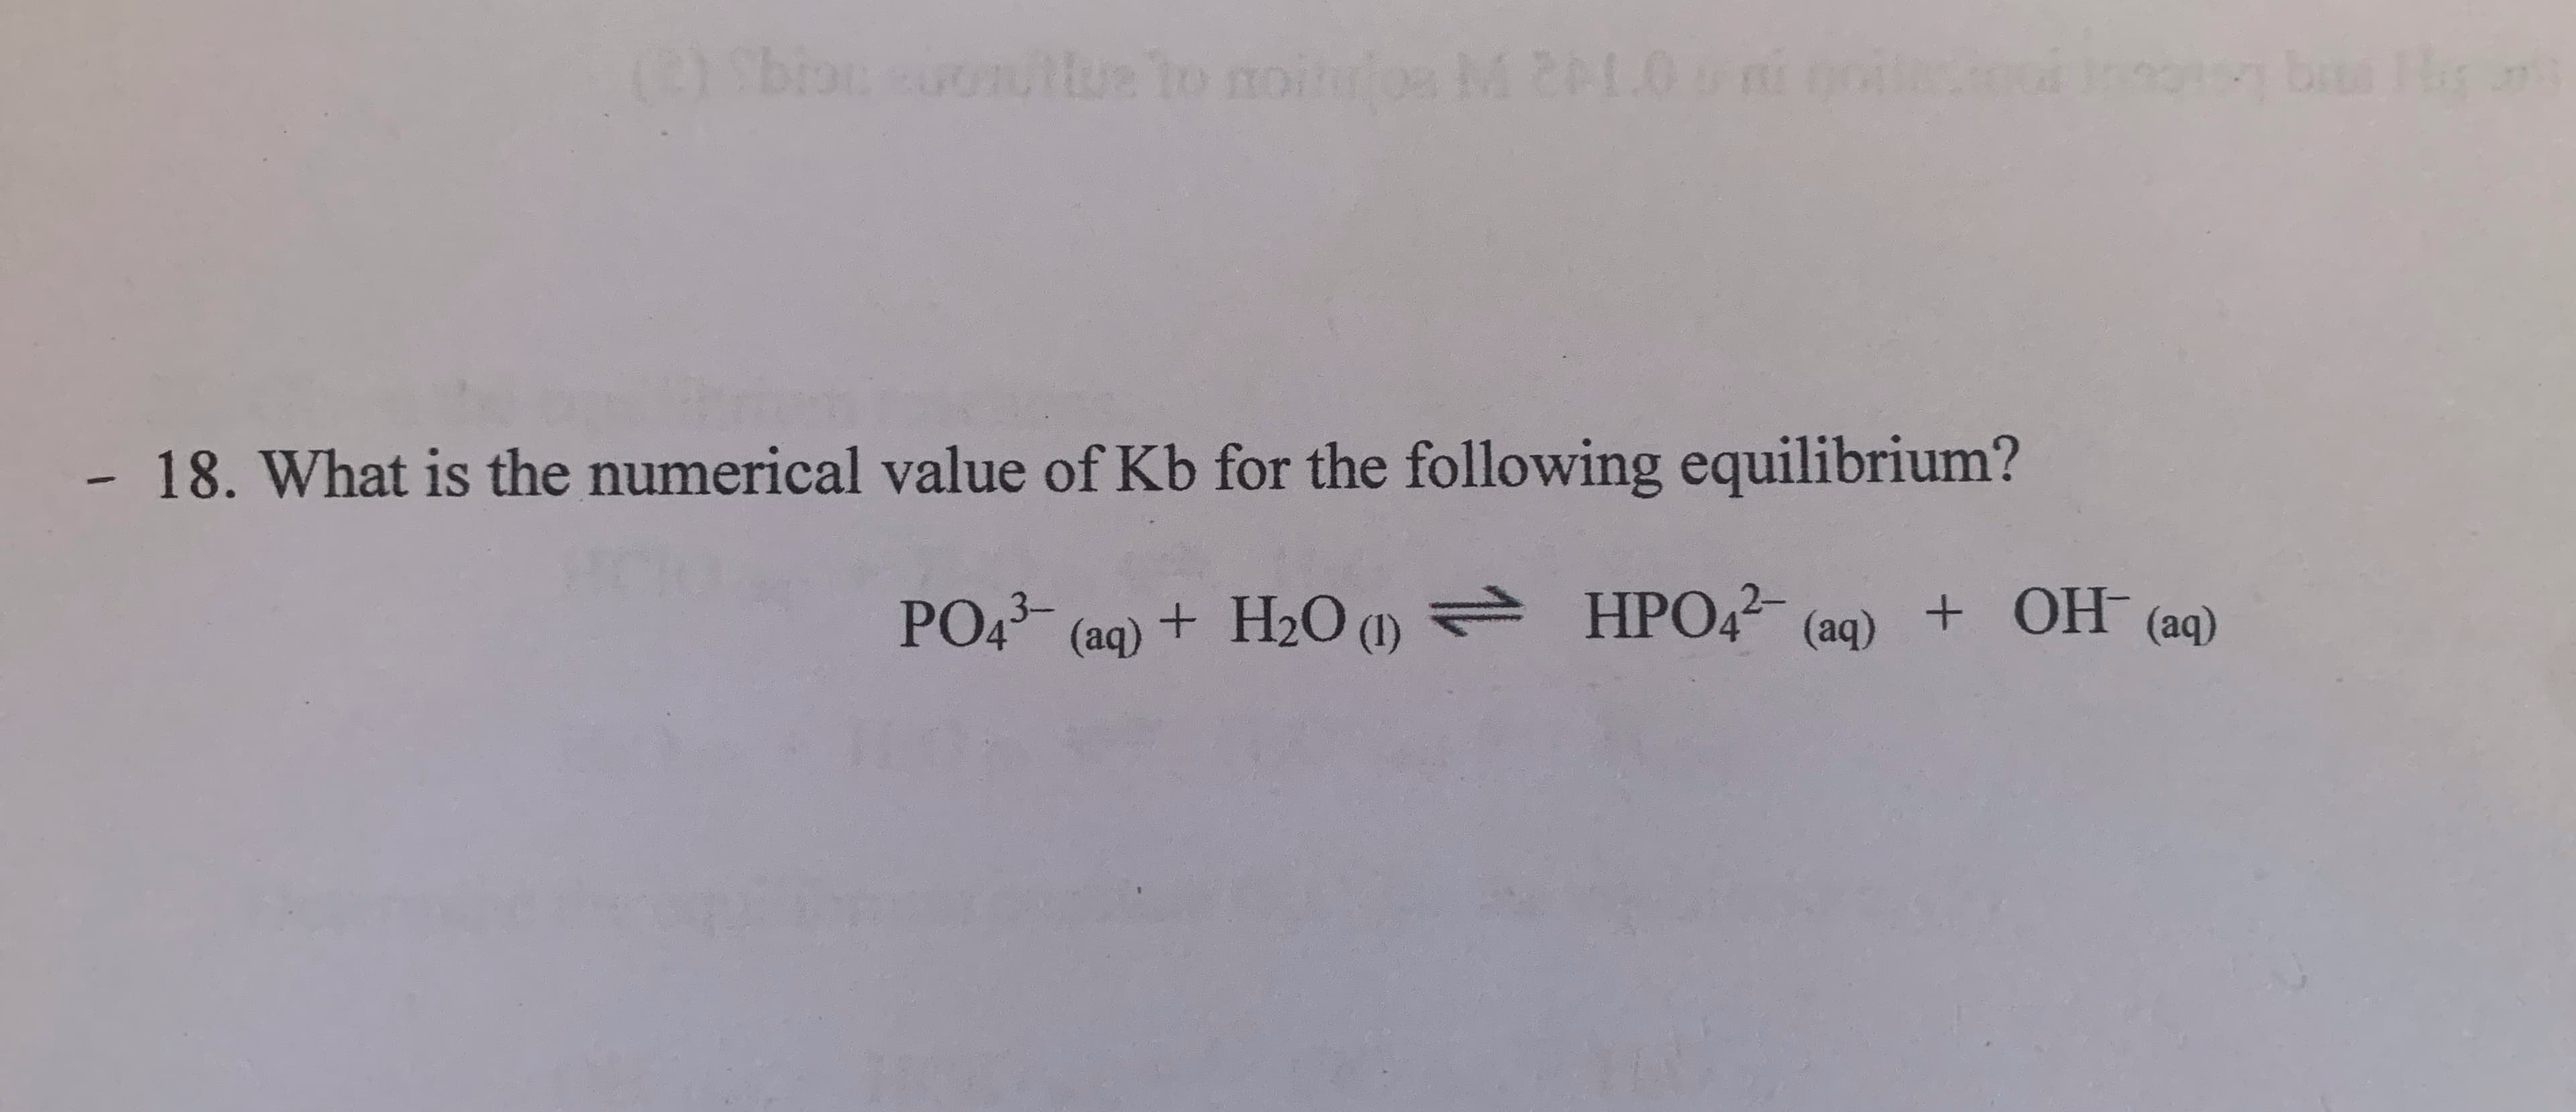 What is the numerical value of Kb for the following equilibrium?
PO43-
+H2O (1) HPO42 (aq)
+ OH (aq)
(aq)
